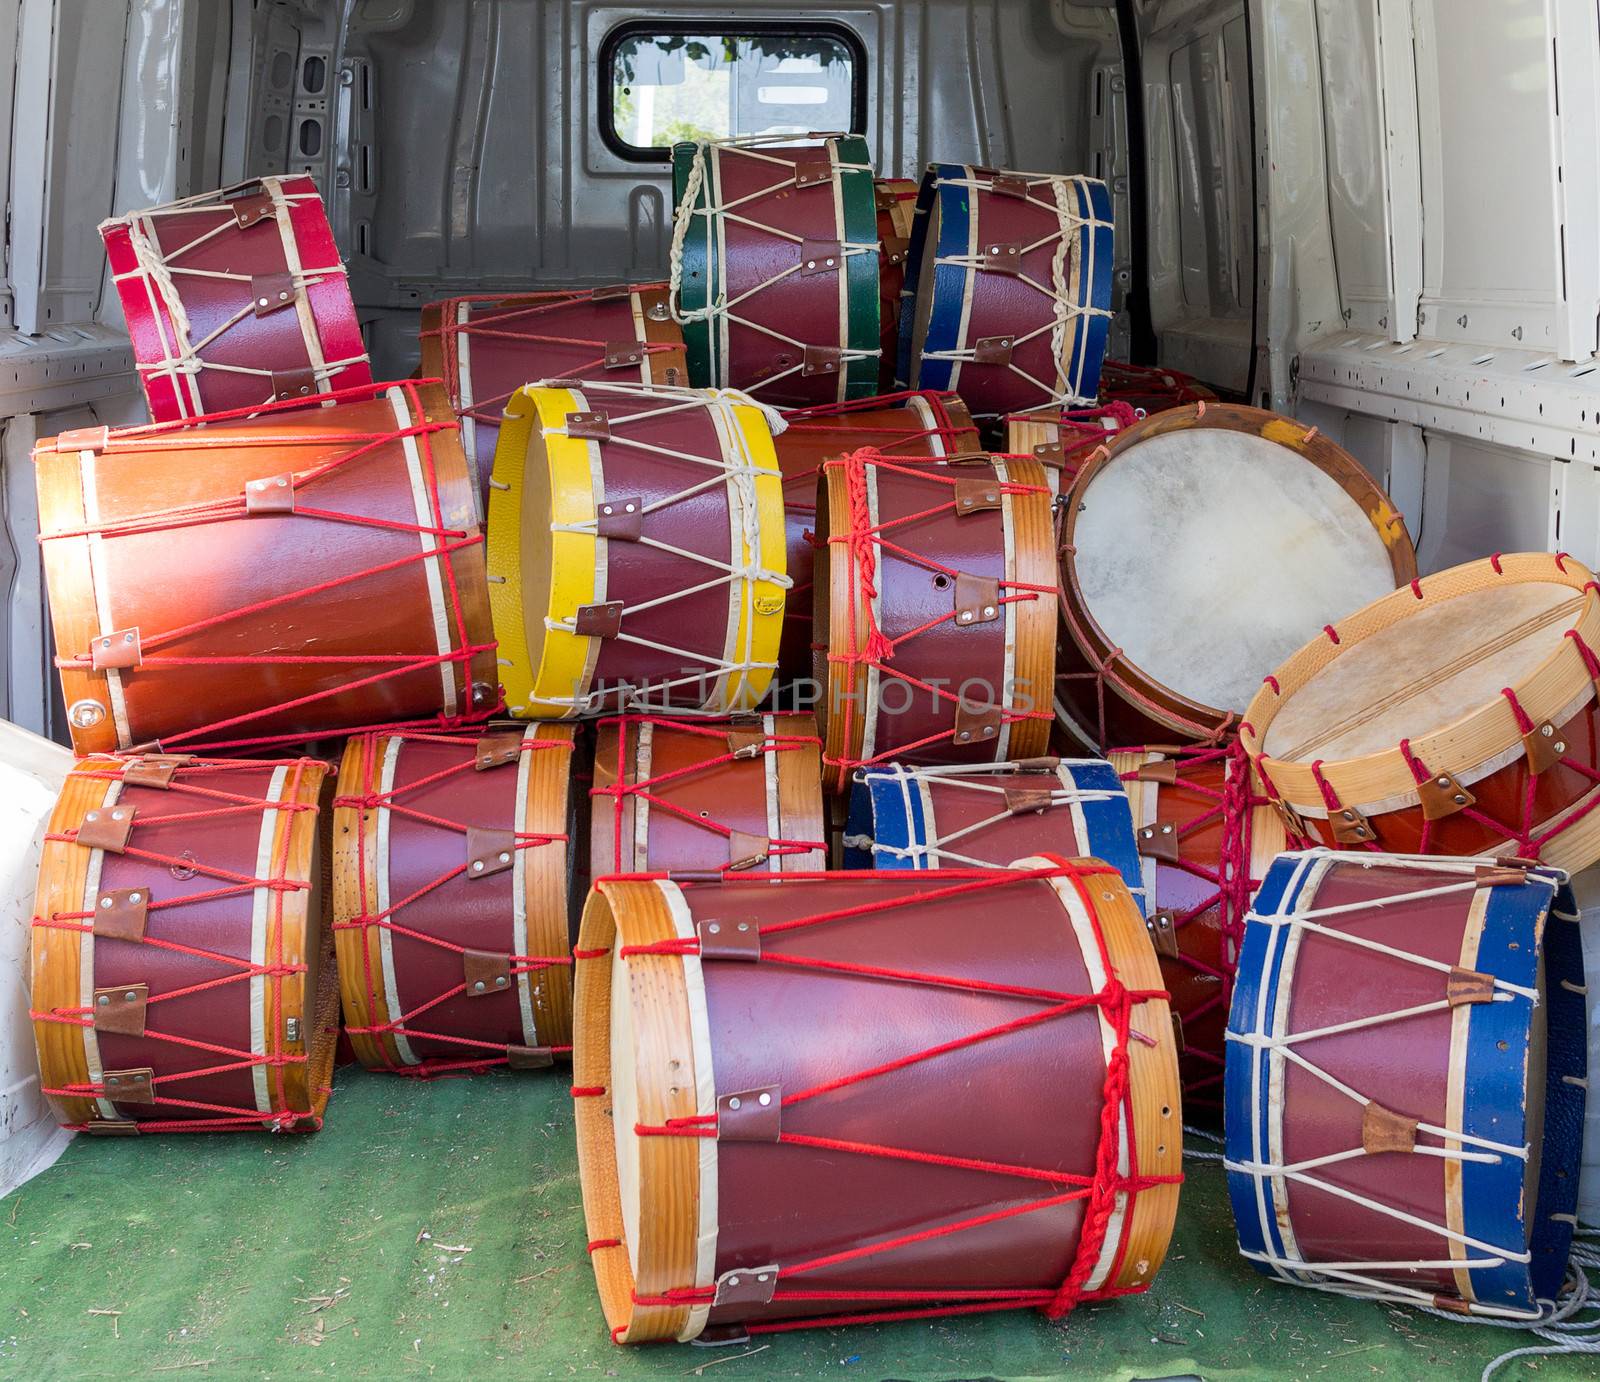 Lot of drums in the back of the van